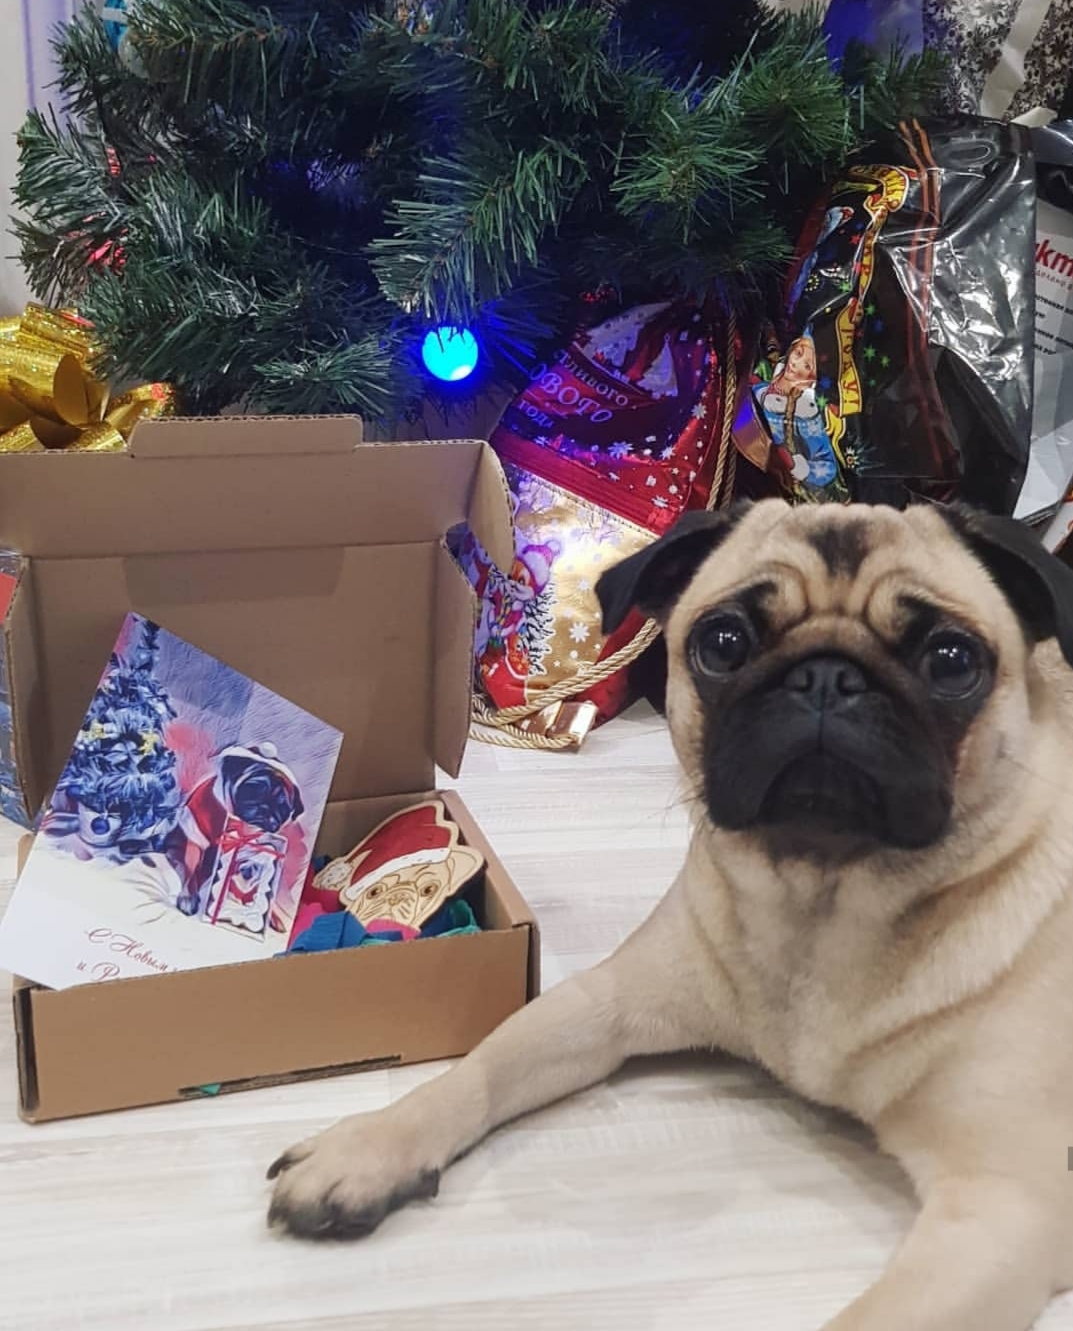 Pug lying on the floor under the christmas tree next to a box filled with photos of its face